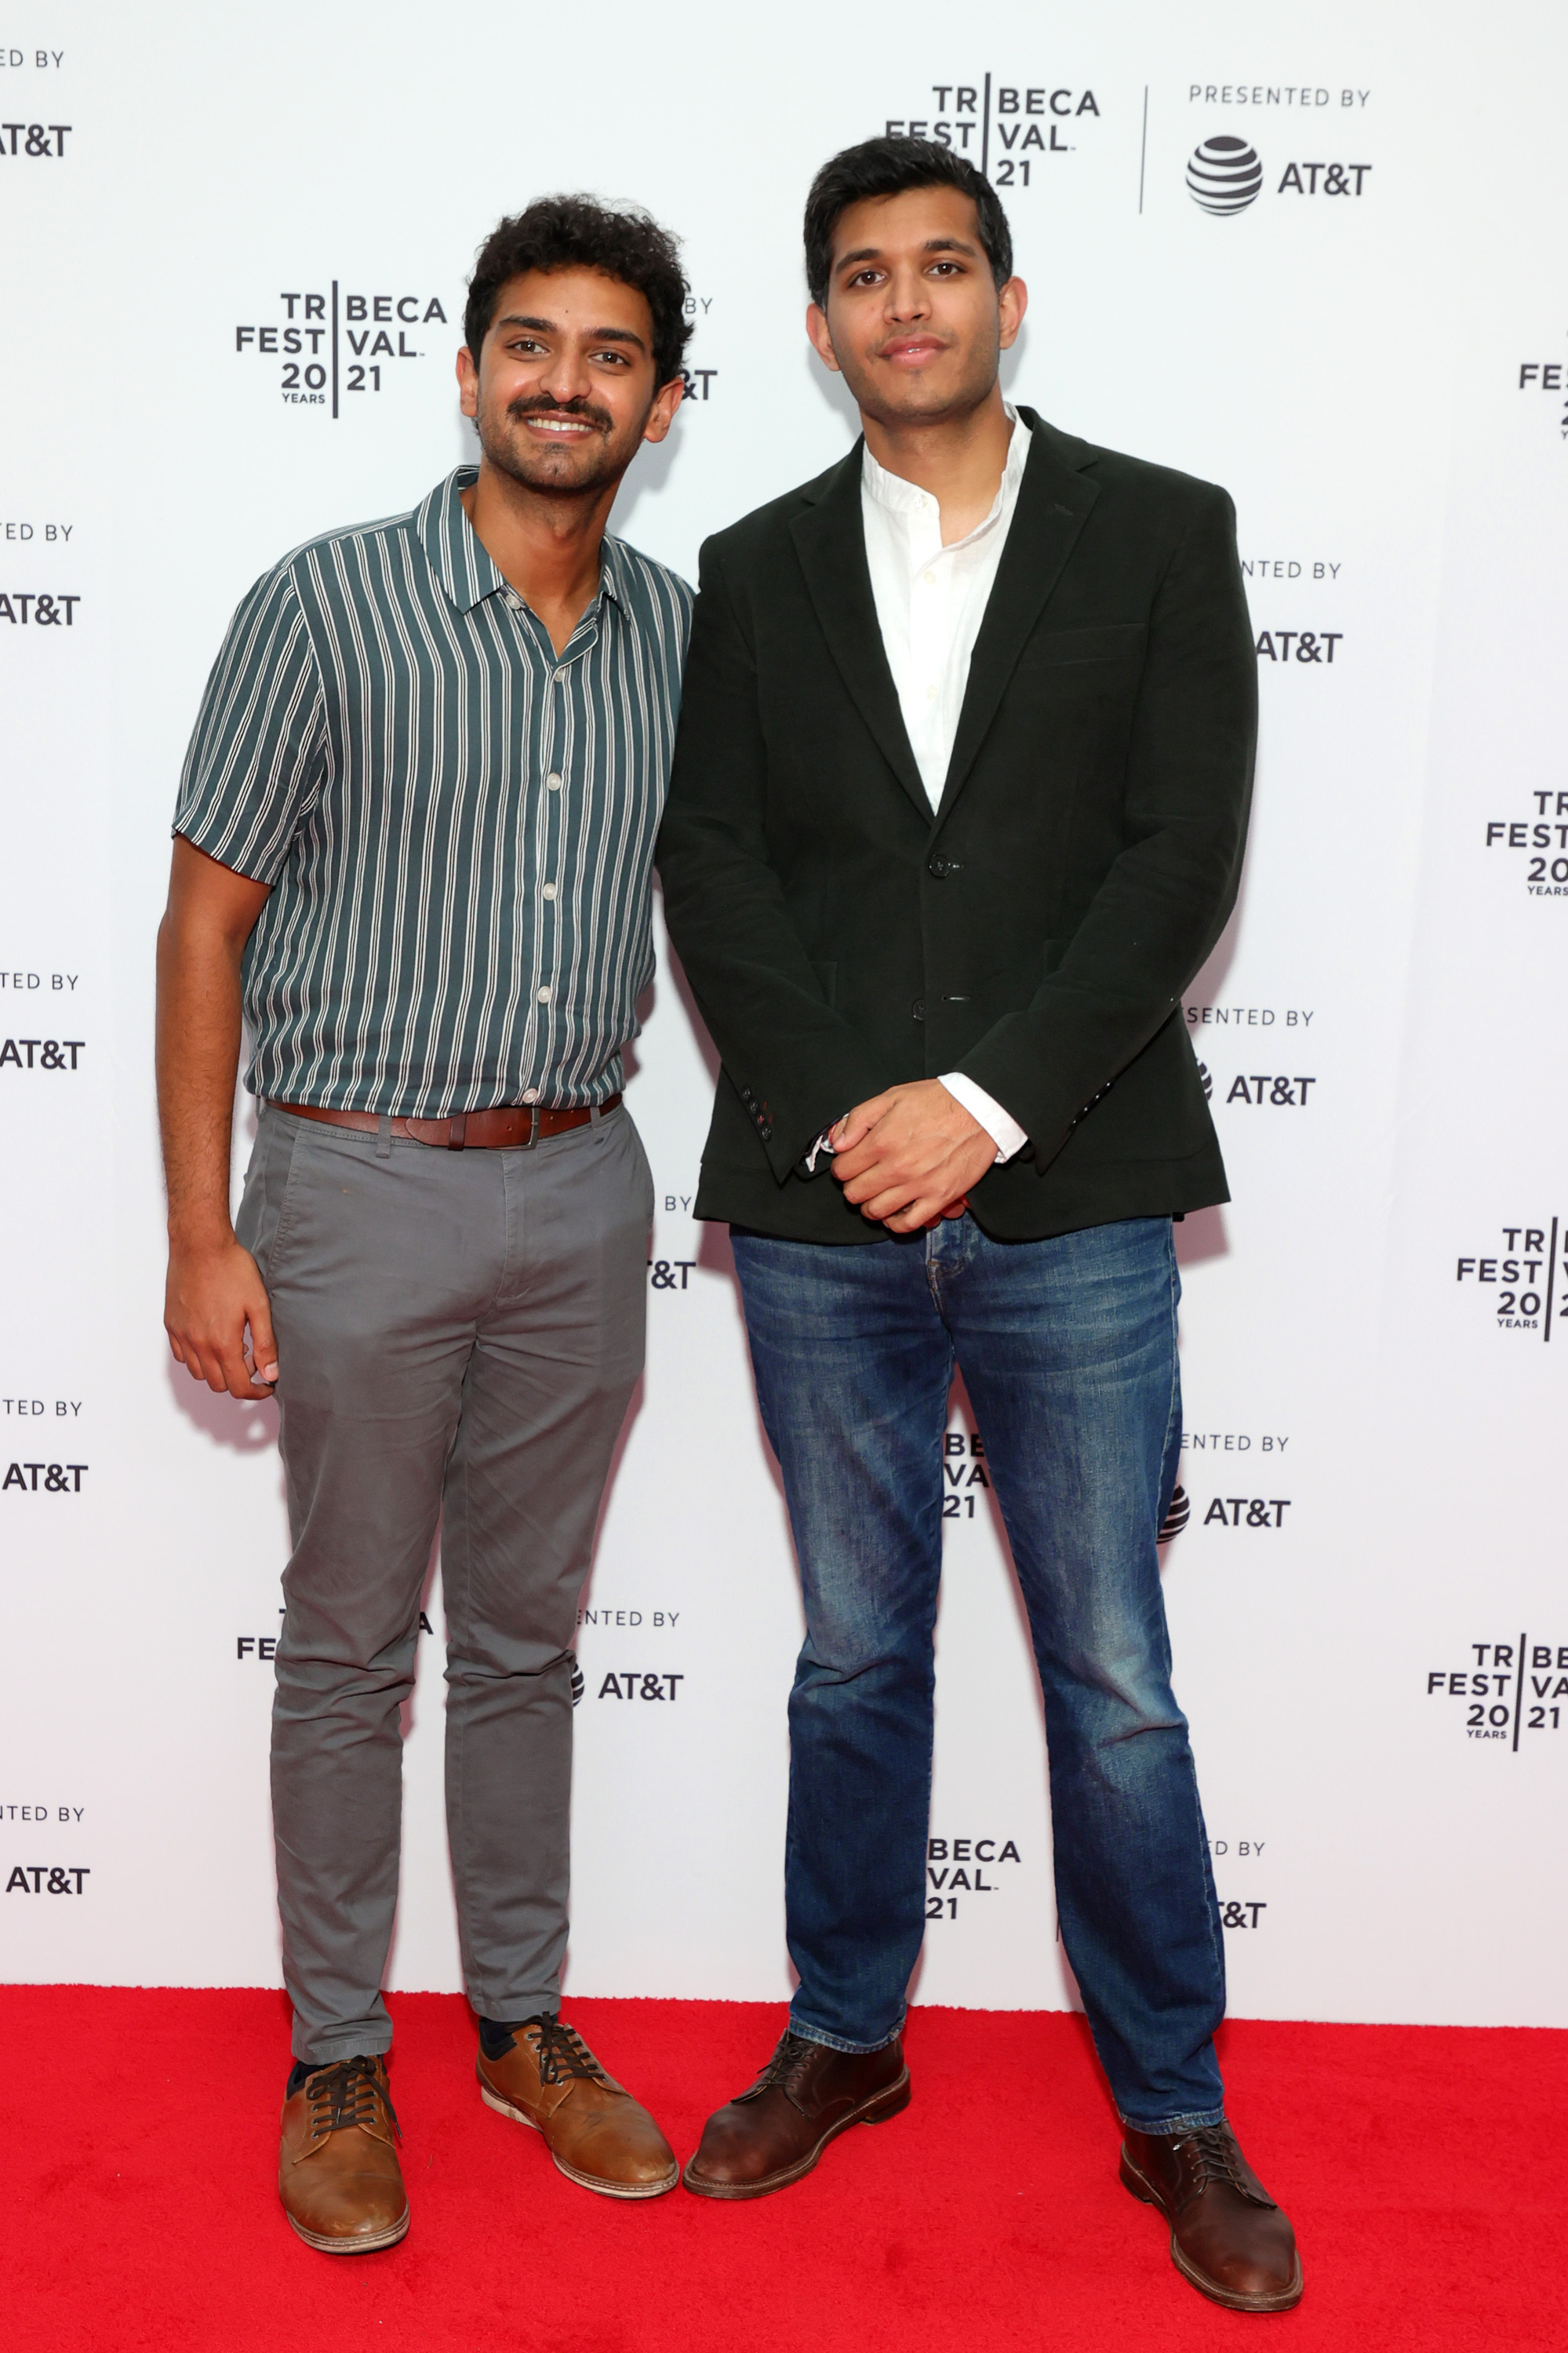 Karan Soni and Roshan Sethi pose at the 2021 Tribeca Festival Premiere of "7 Days" at Brooklyn Commons at MetroTech on June 10, 2021, in New York City | Source: Getty Images